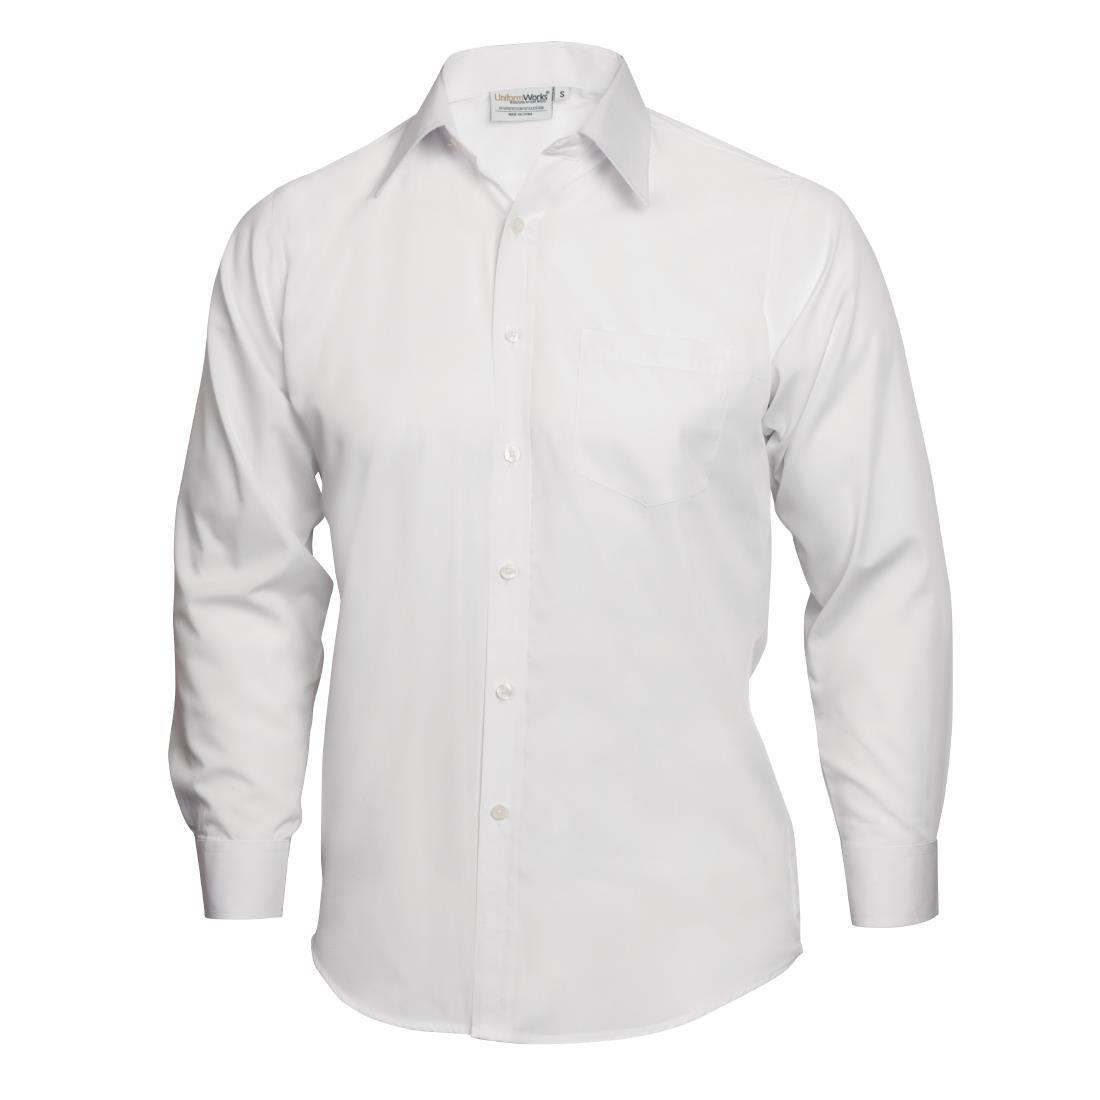 Chef Works Unisex Long Sleeve Shirt White L - A730-L  - 2